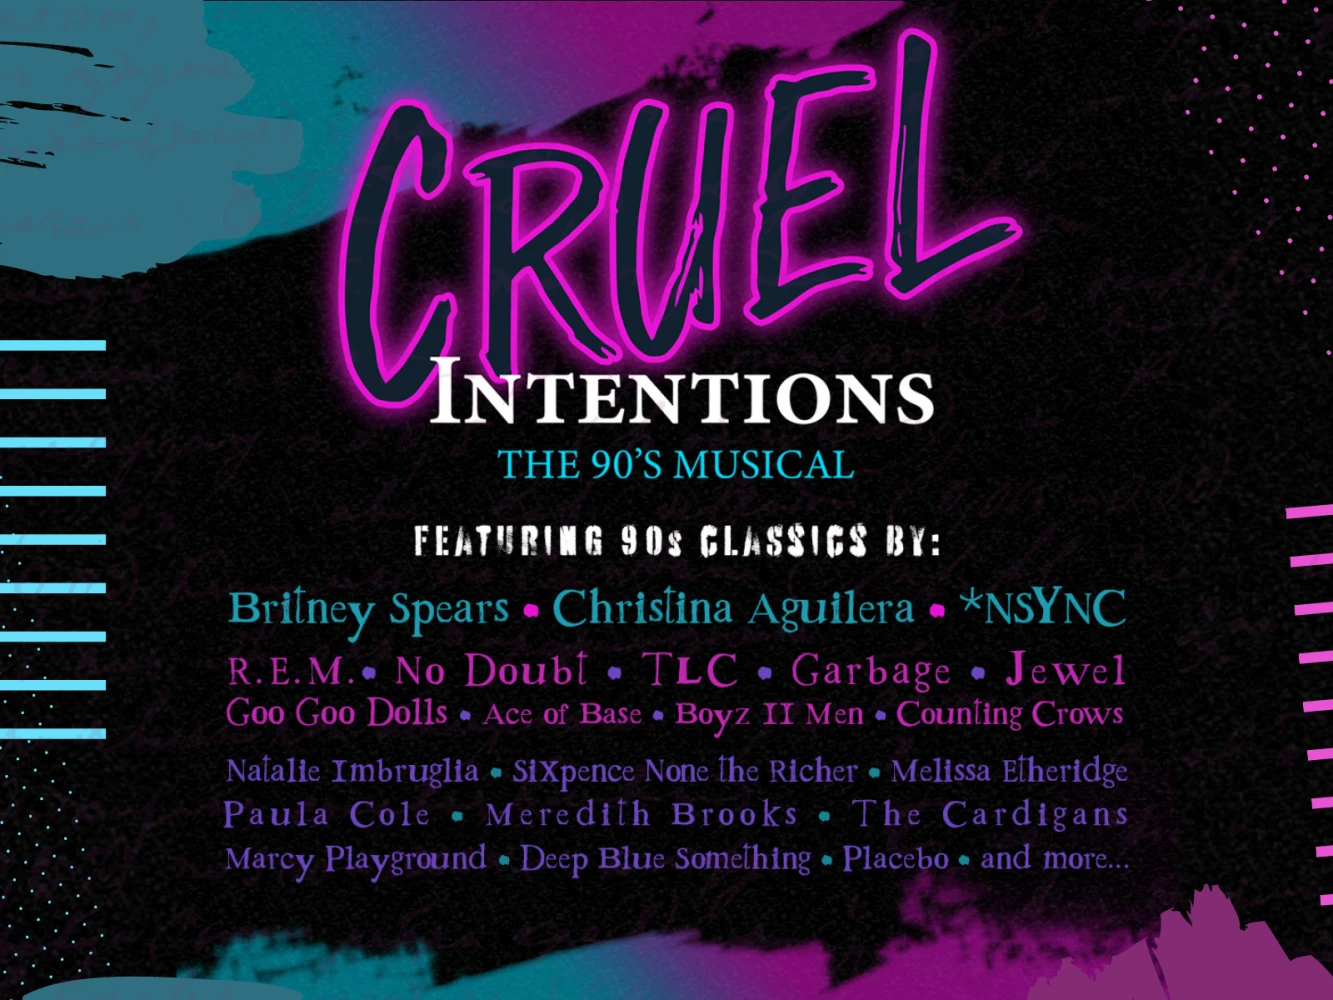 Cruel Intentions: The 90s Musical: What to expect - 5